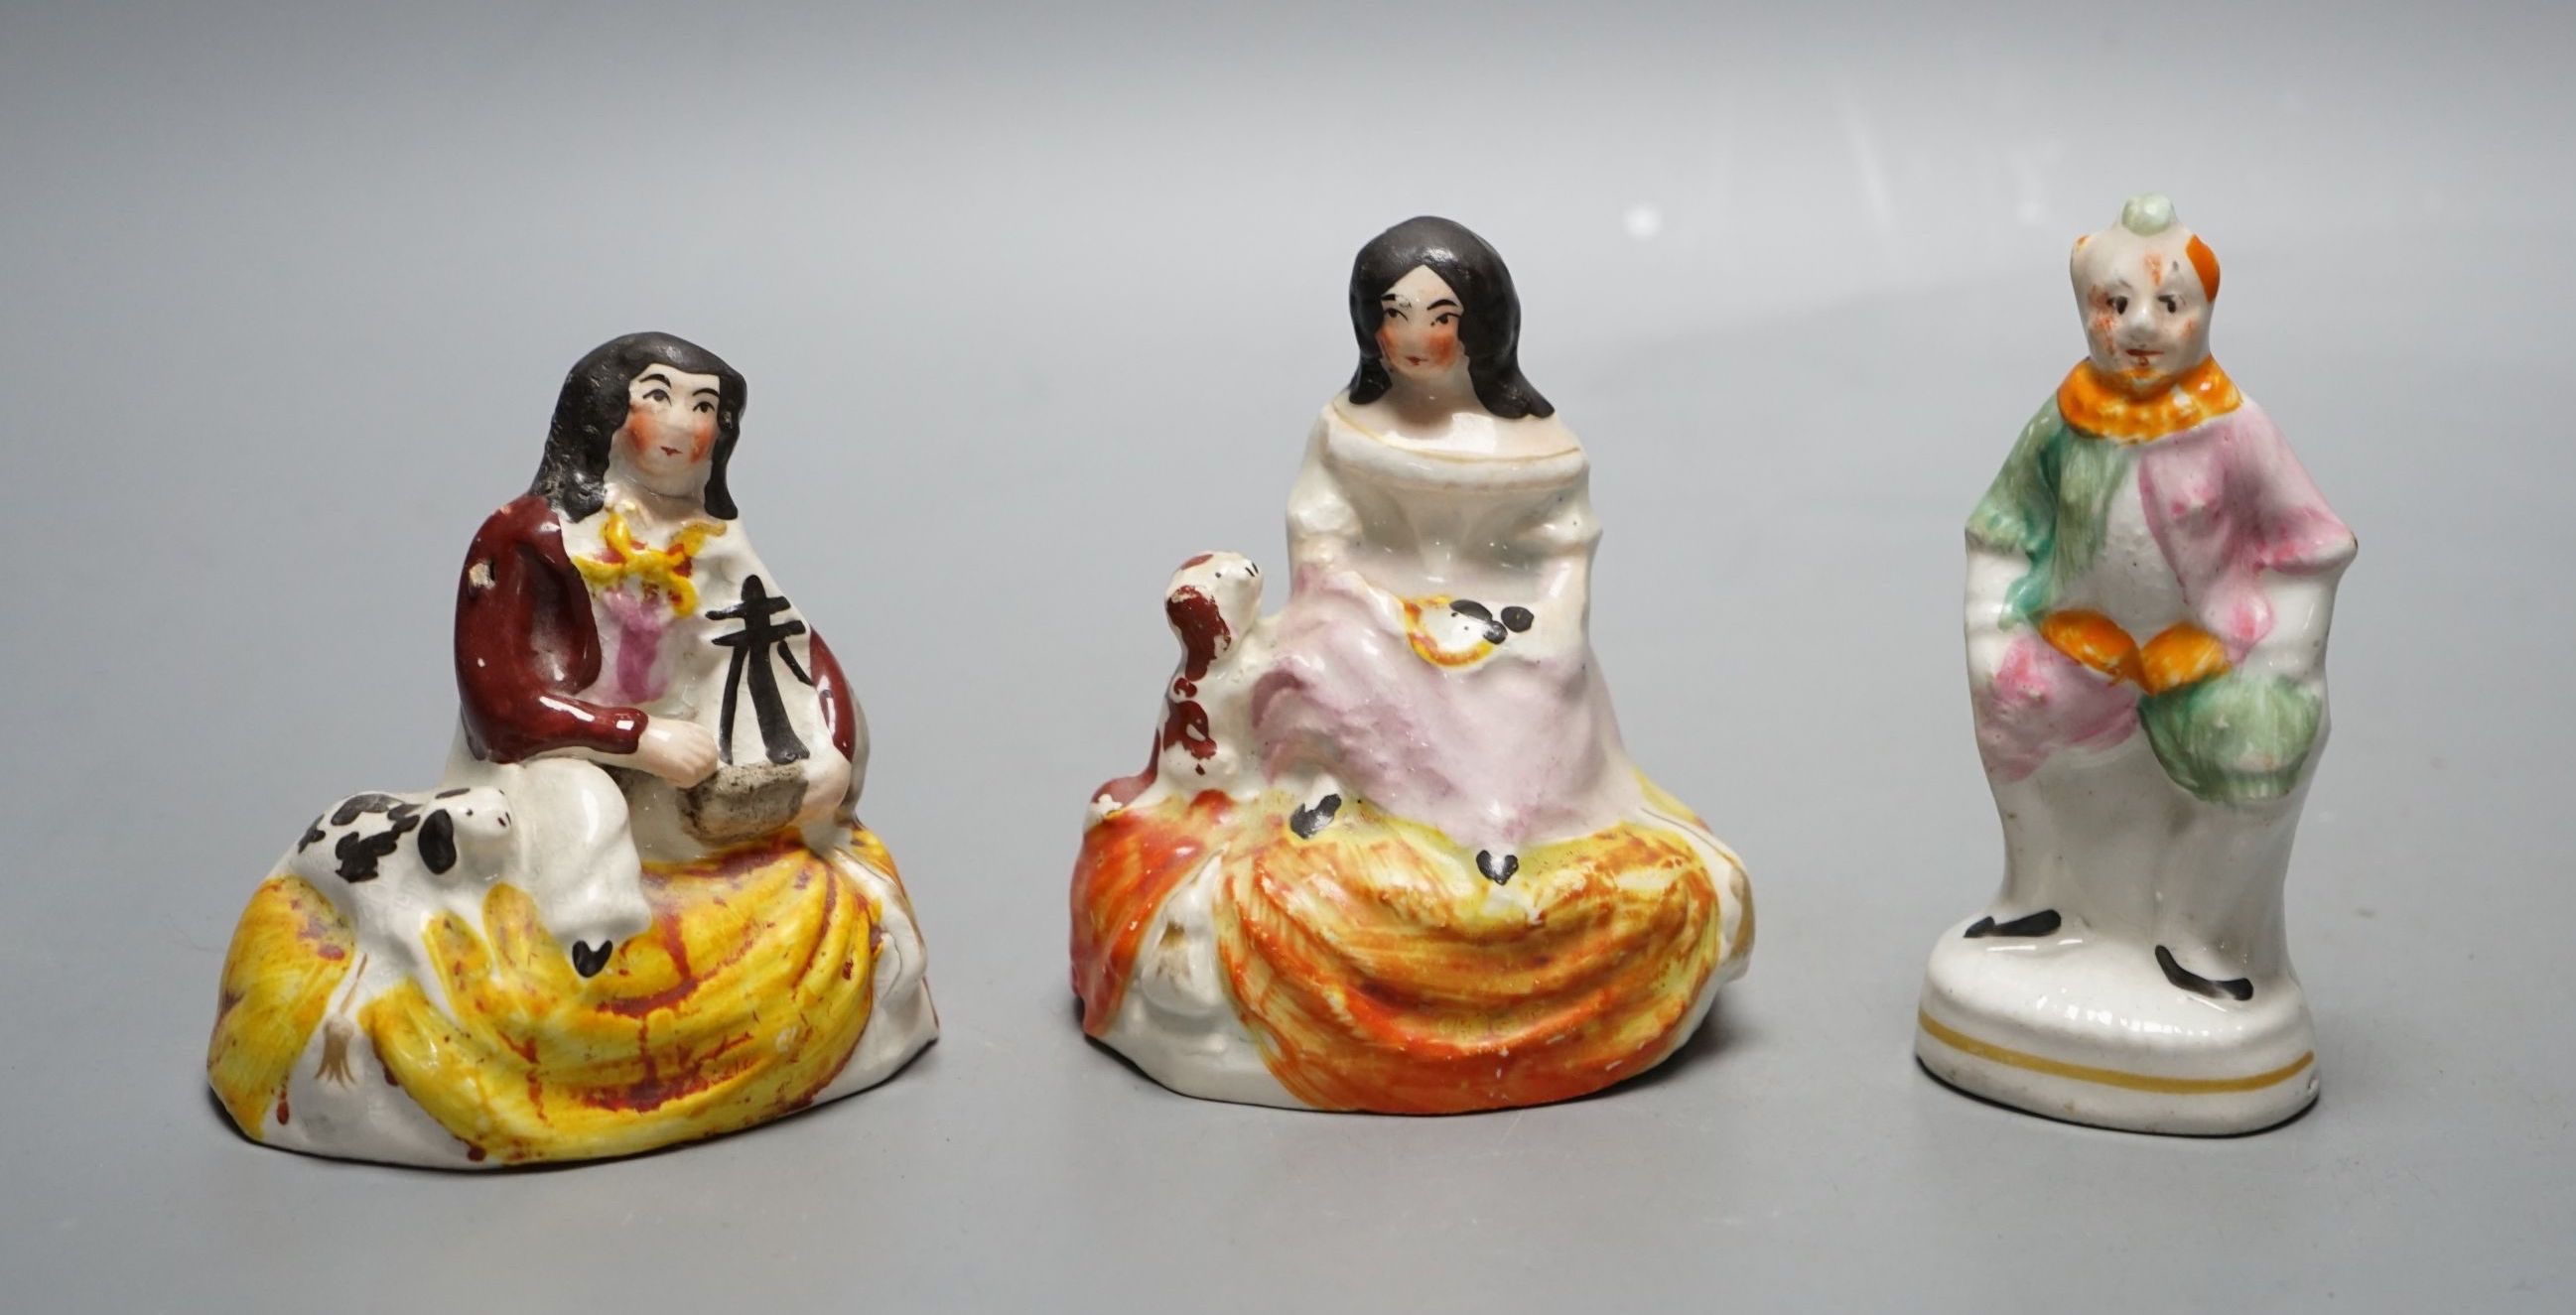 A pair of Staffordshire porcellaneous groups of children with a King Charles spaniel and a figure of Grimaldi the clown, c.1830-50 (3). Provenance - Dennis G. Rice collection., Clown 10 cms high.